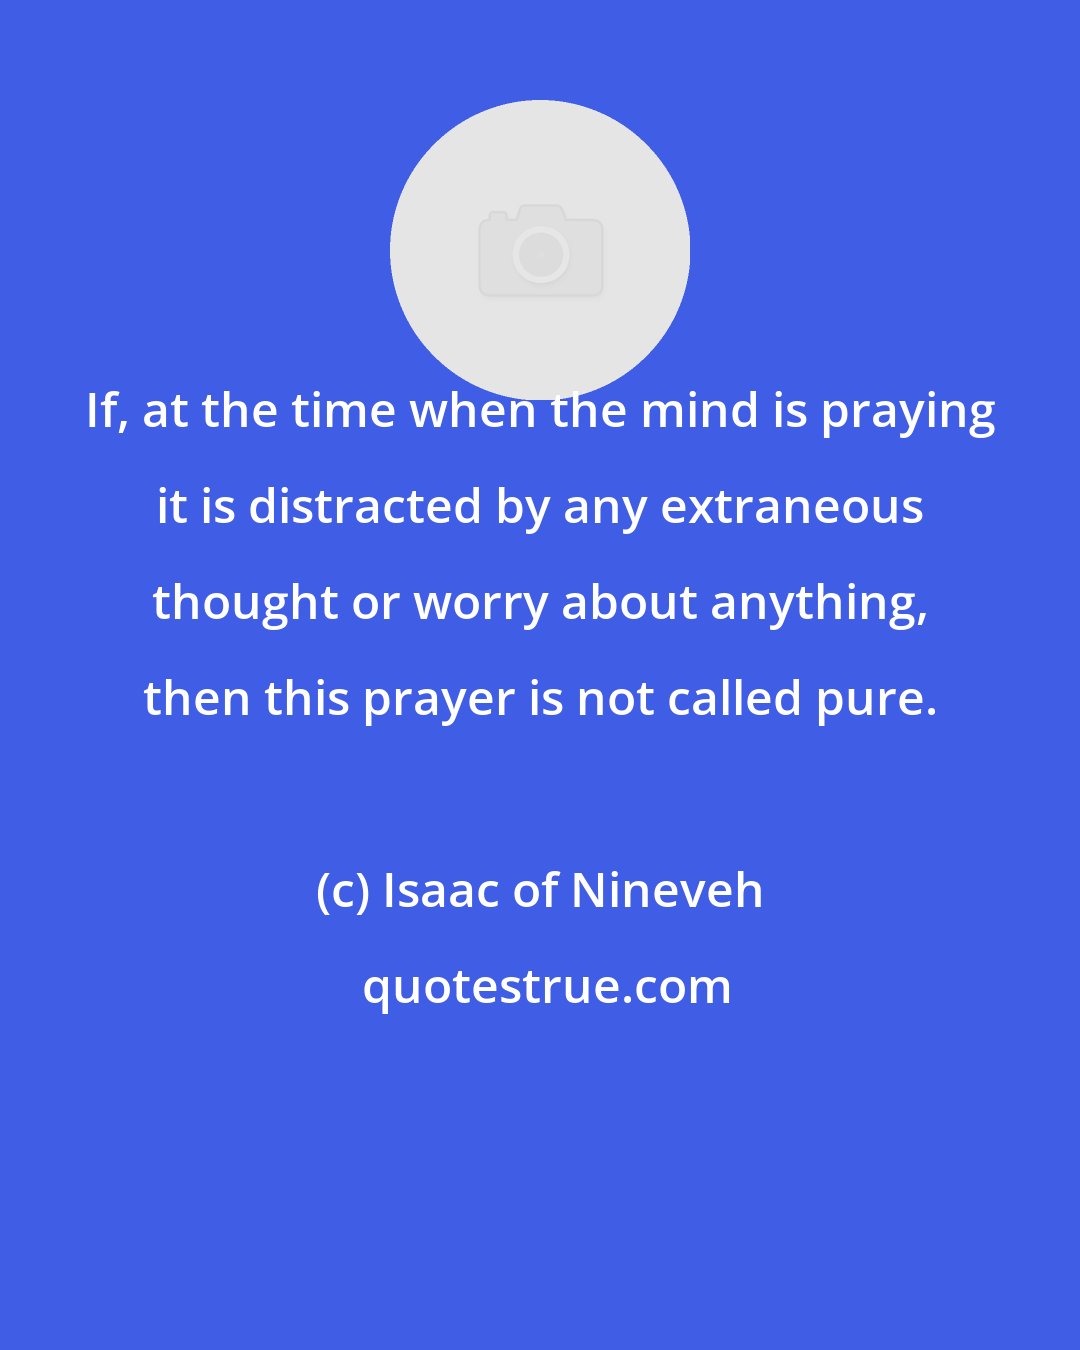 Isaac of Nineveh: If, at the time when the mind is praying it is distracted by any extraneous thought or worry about anything, then this prayer is not called pure.